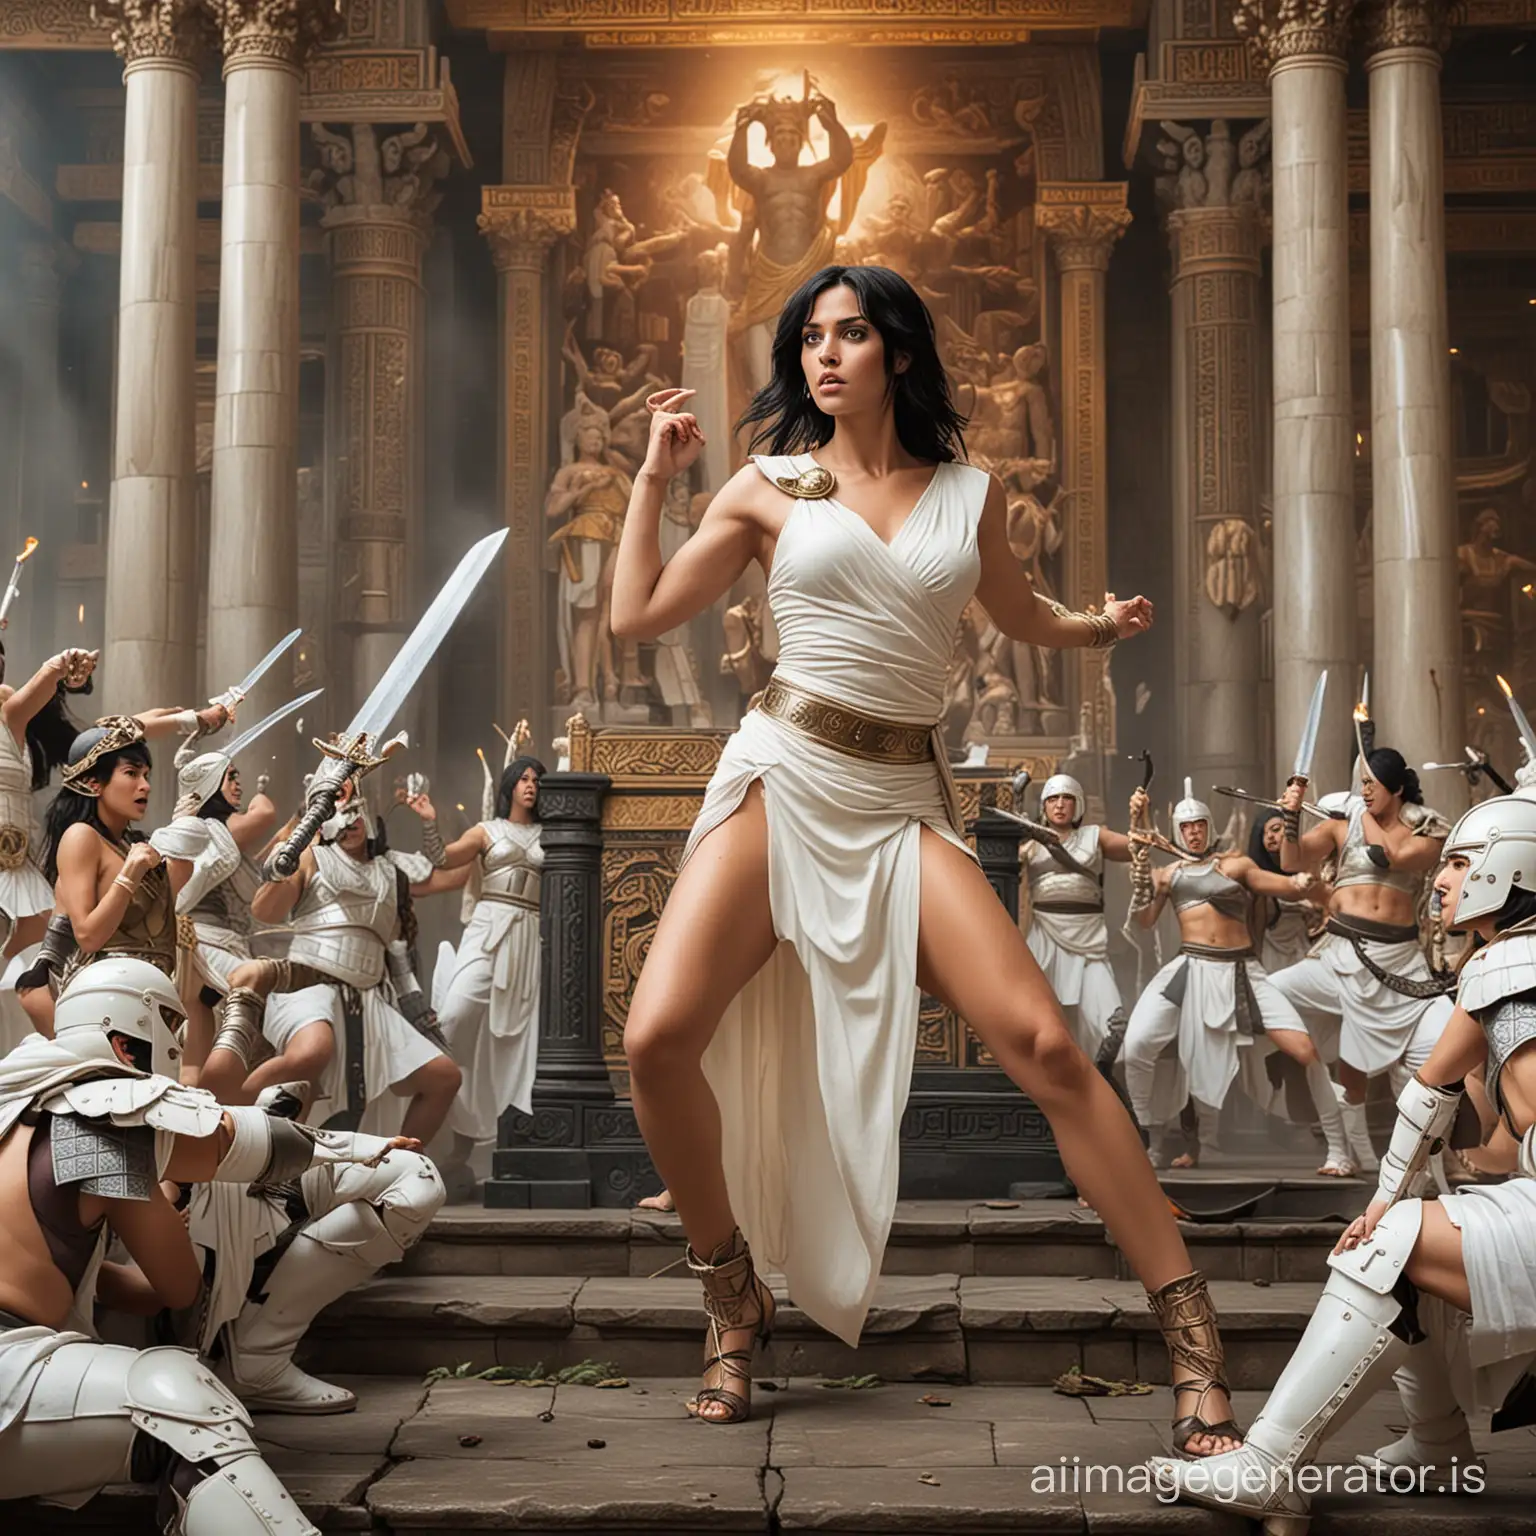 Graceful-BlackHaired-Warrior-in-Toga-Battles-Armored-Foe-in-Majestic-Temple-Throne-Room